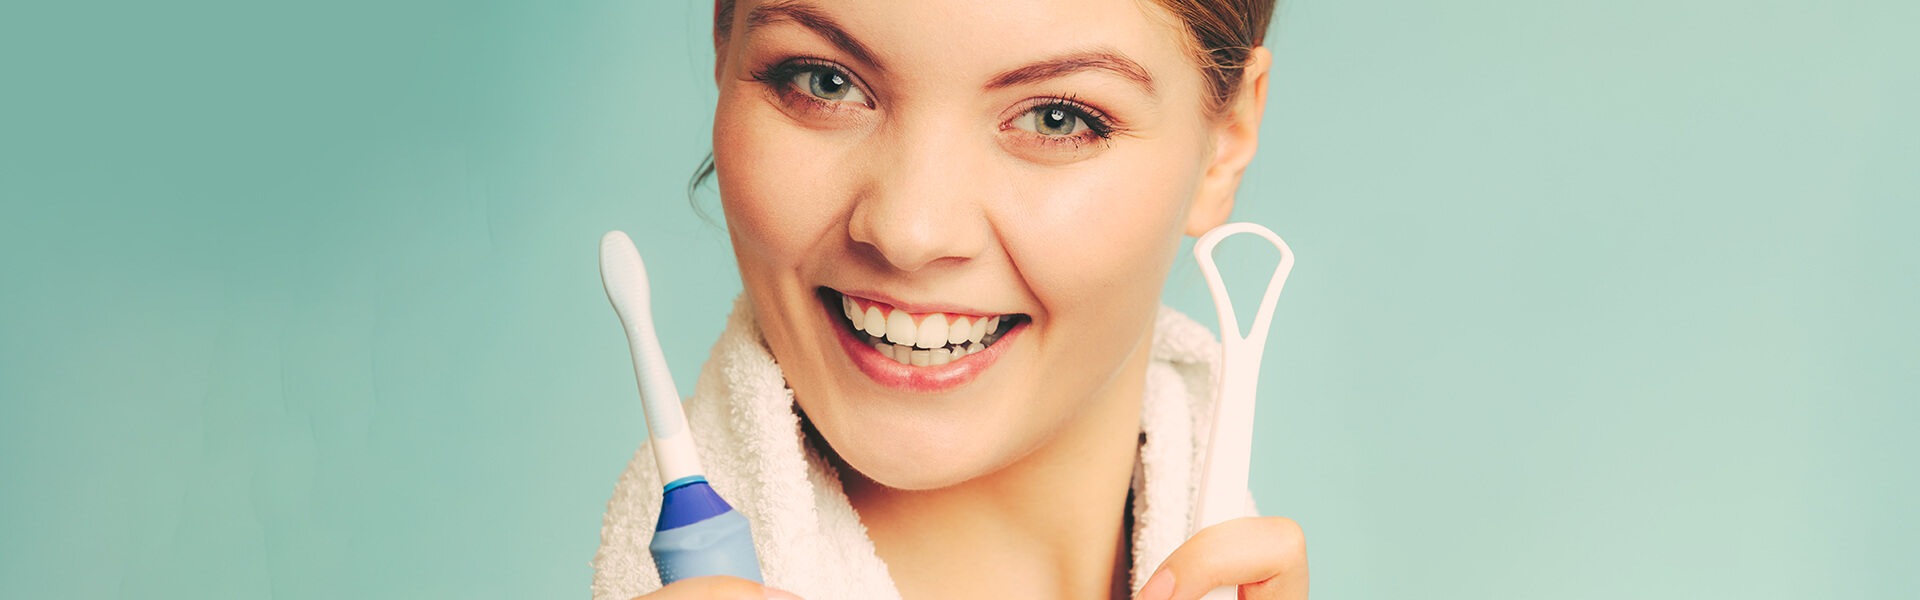 Dental Exams and Cleanings in Richmond Hill, ON 